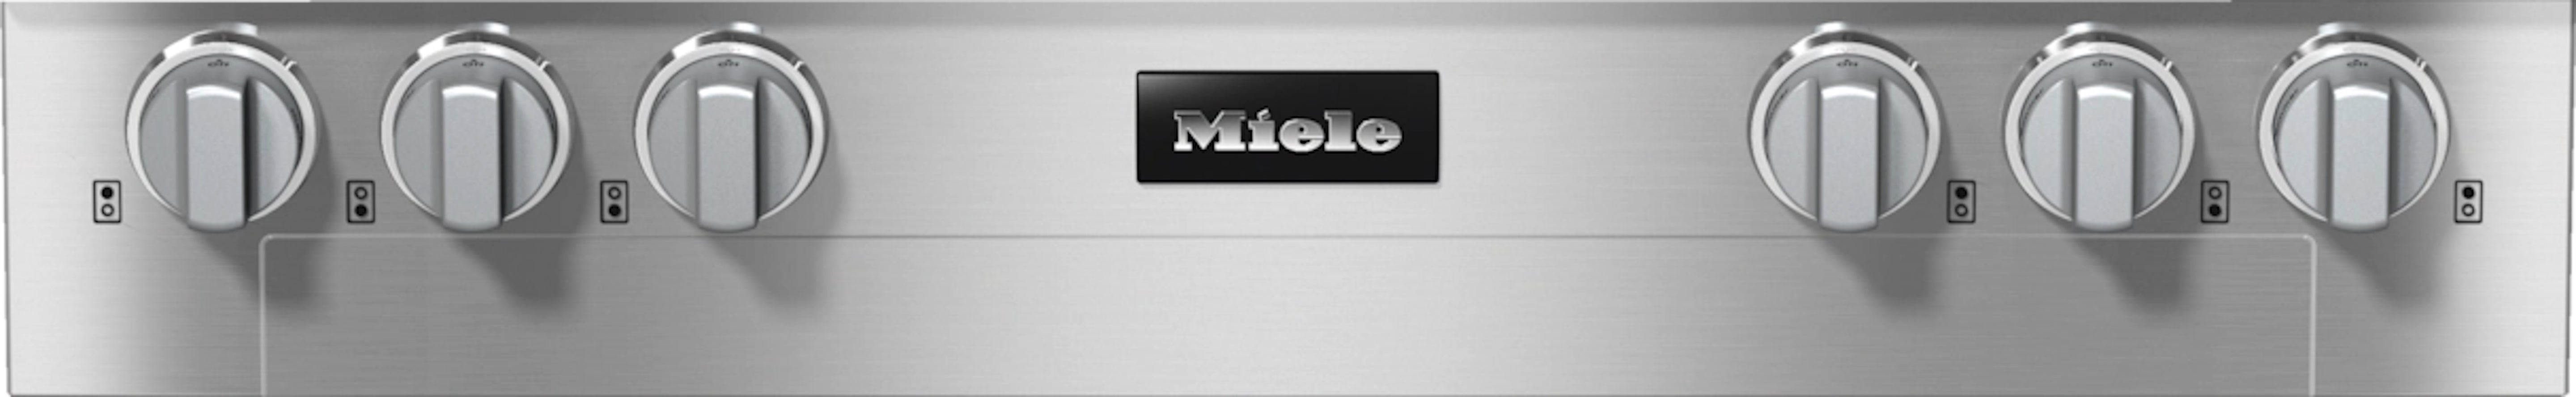 Miele - 36 Inch Gas Cooktop in Stainless - KMR 1134-3 G